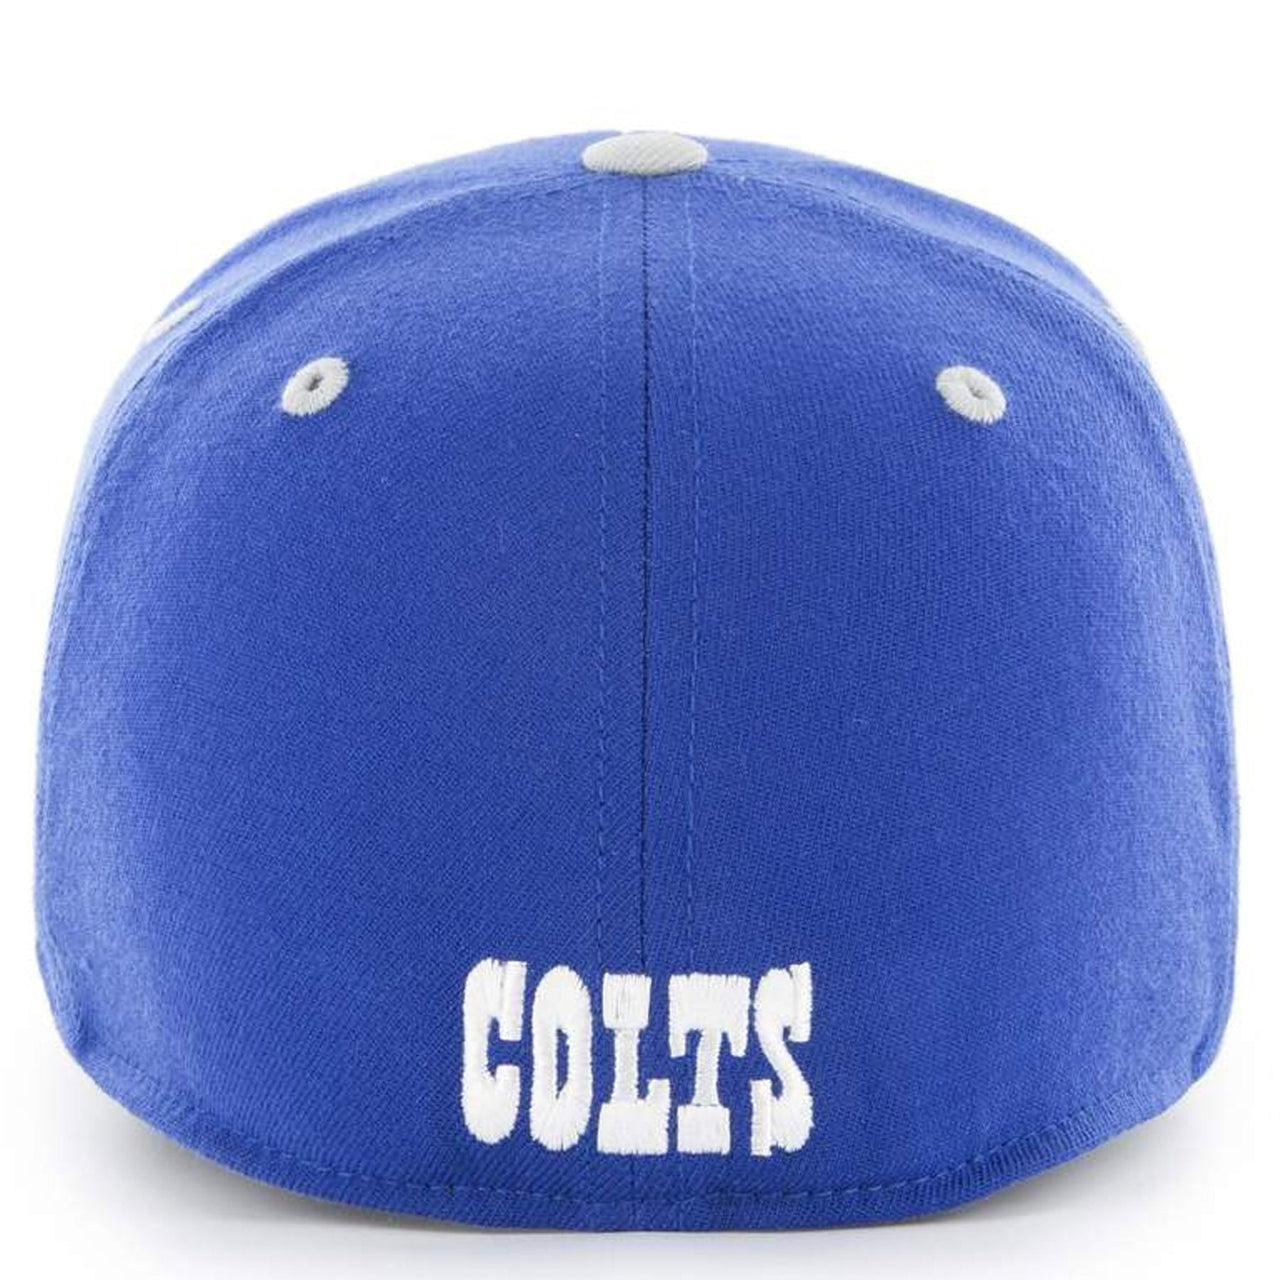 On the back of the Indianapolis colts blue on gray stretch fit cap has the Colts wordmark embroidered